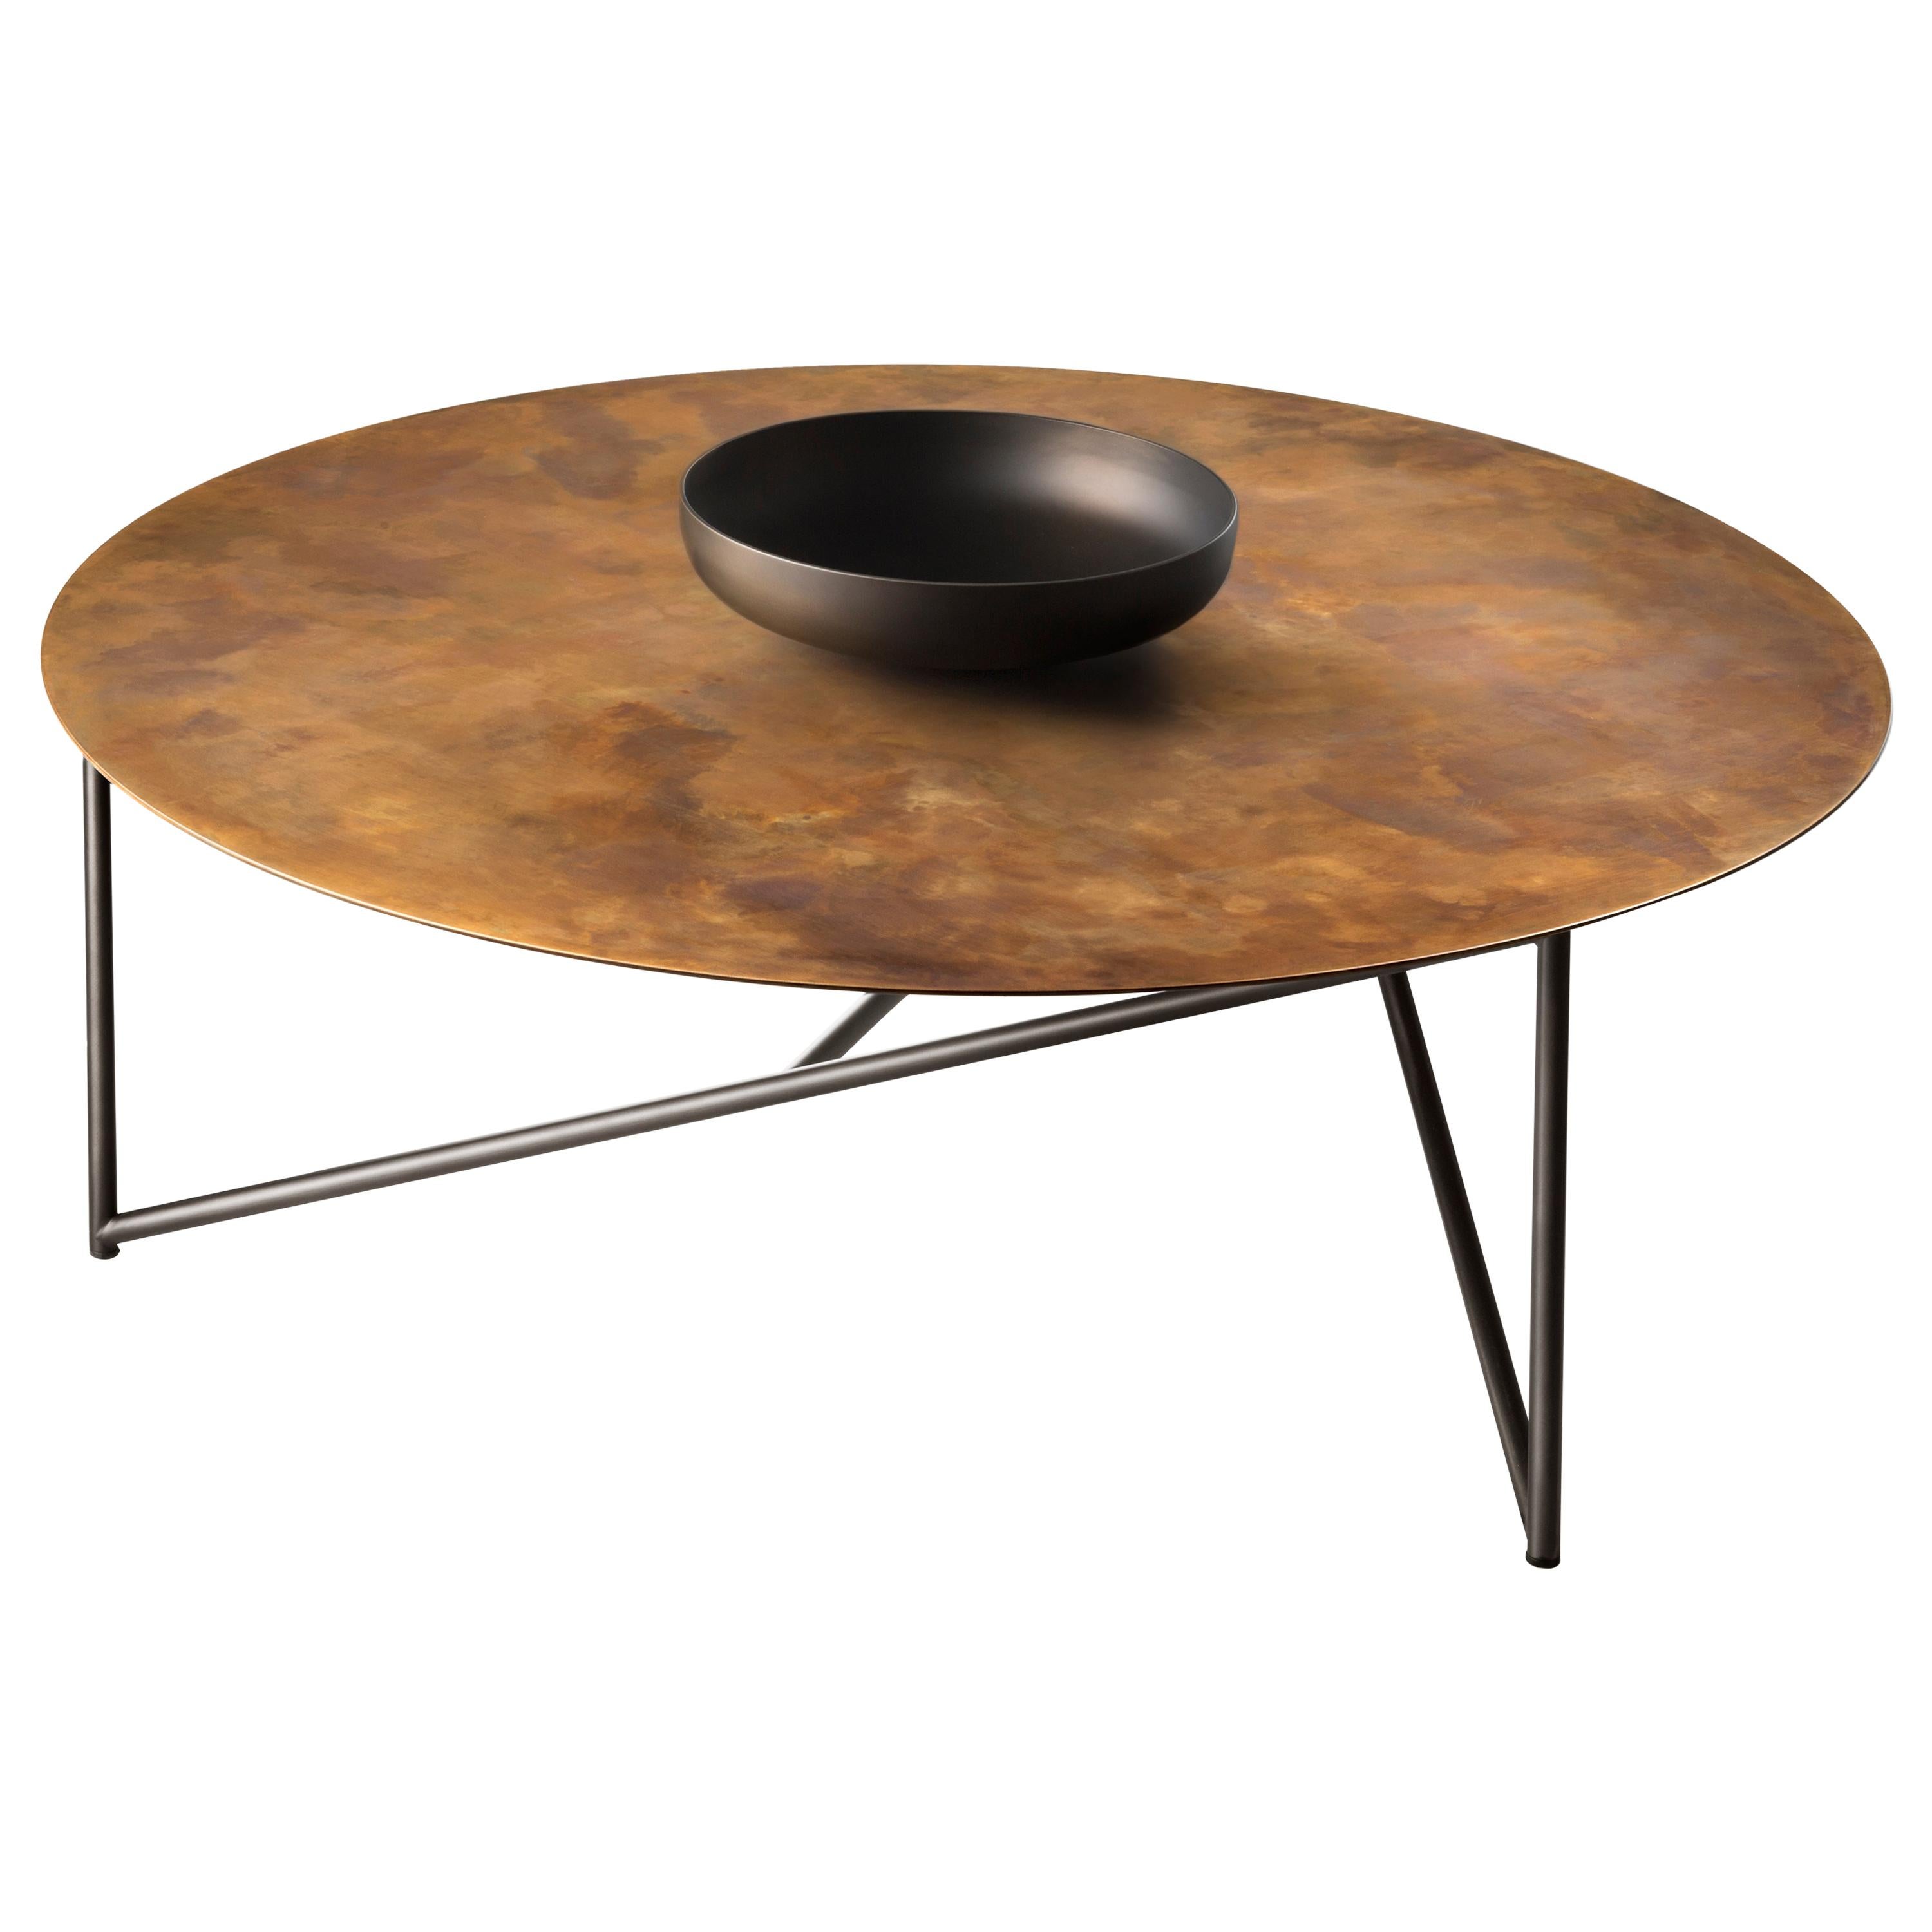 DeCastelli Parsec 98 Coffee Table in Brass with Central Metal Bowl For Sale